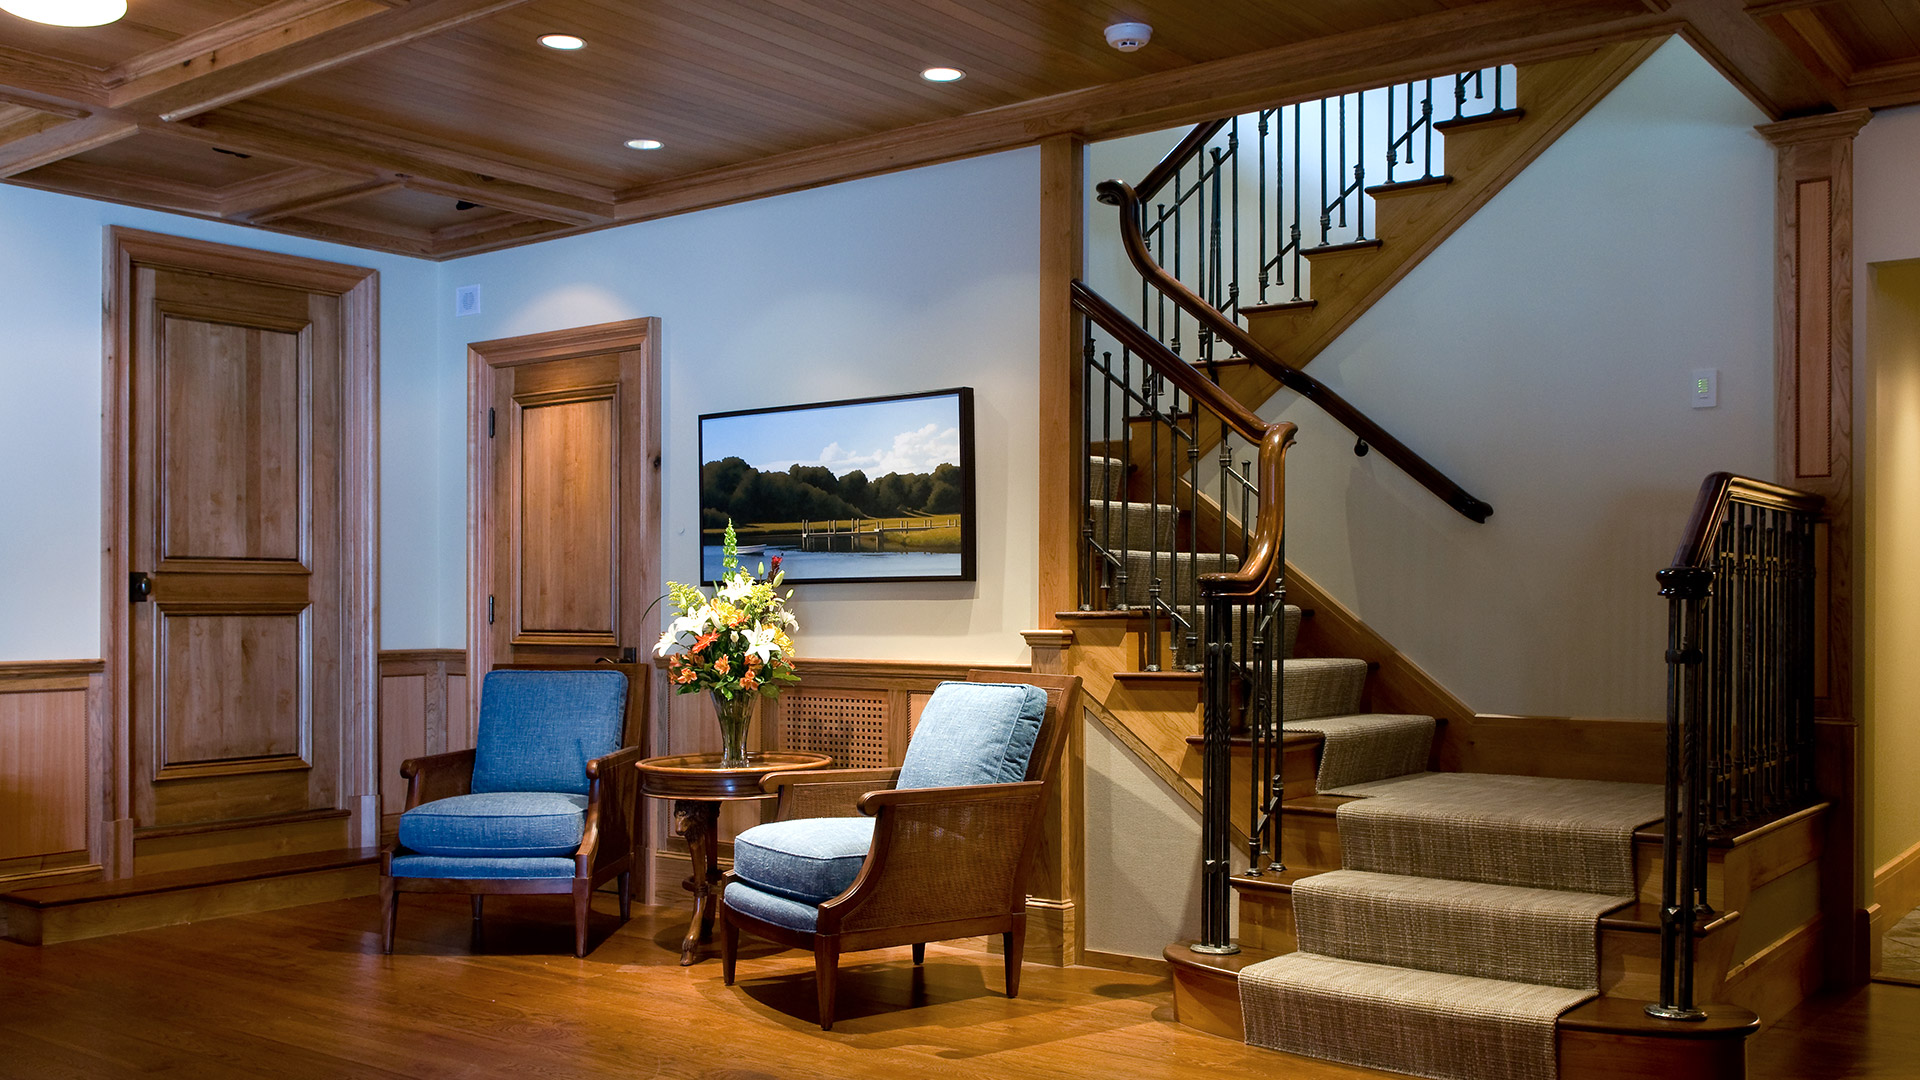 Lake Wentworth, New Hampshire basement stair with custom metal balusters